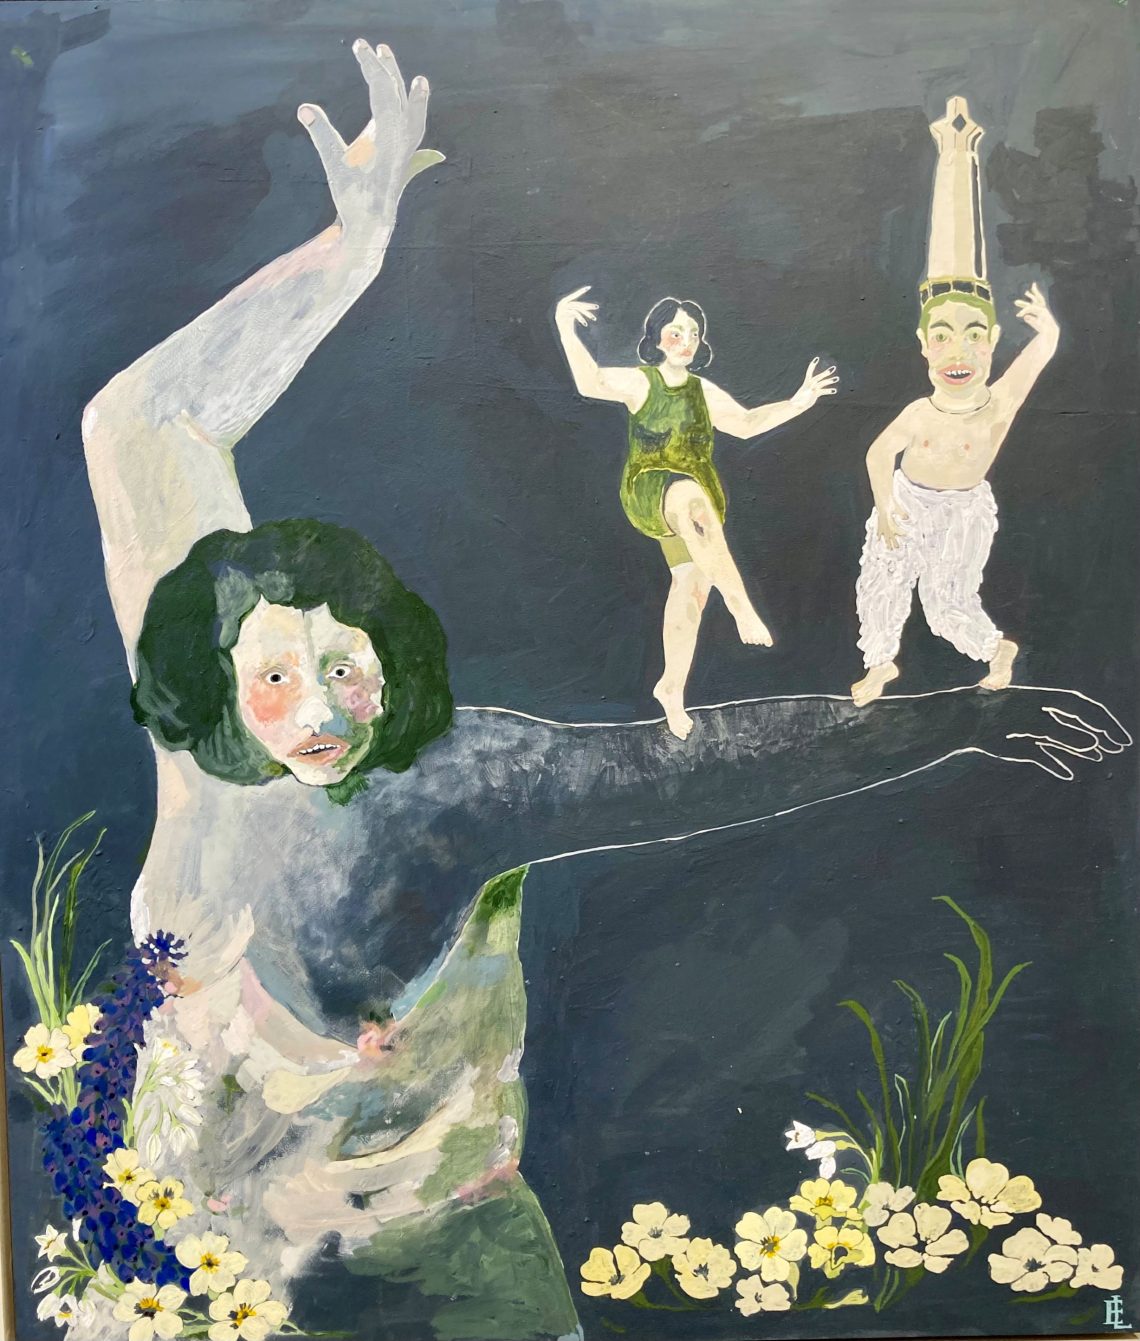 Image shows a painting of naked woman, plus two other figures, dancing.